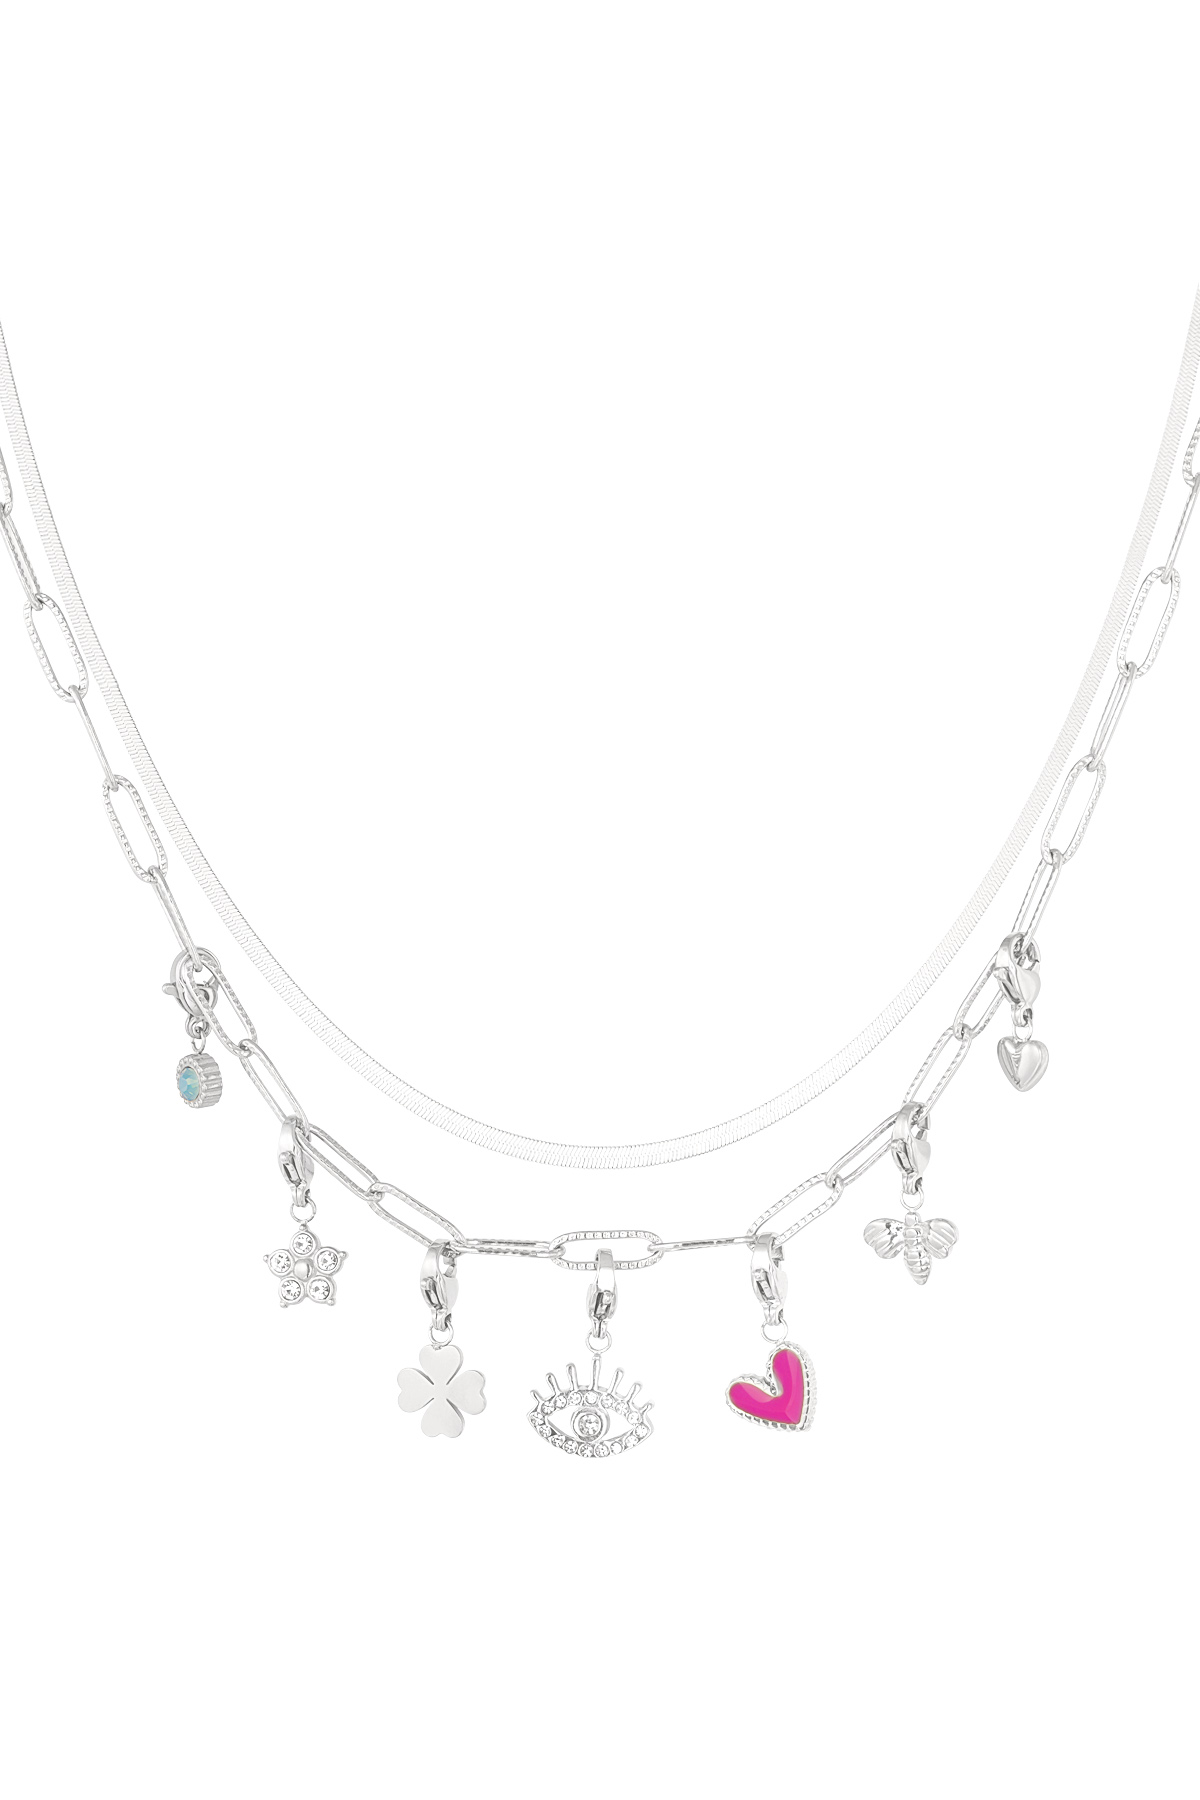 Charm necklace lovey dovey - silver h5 